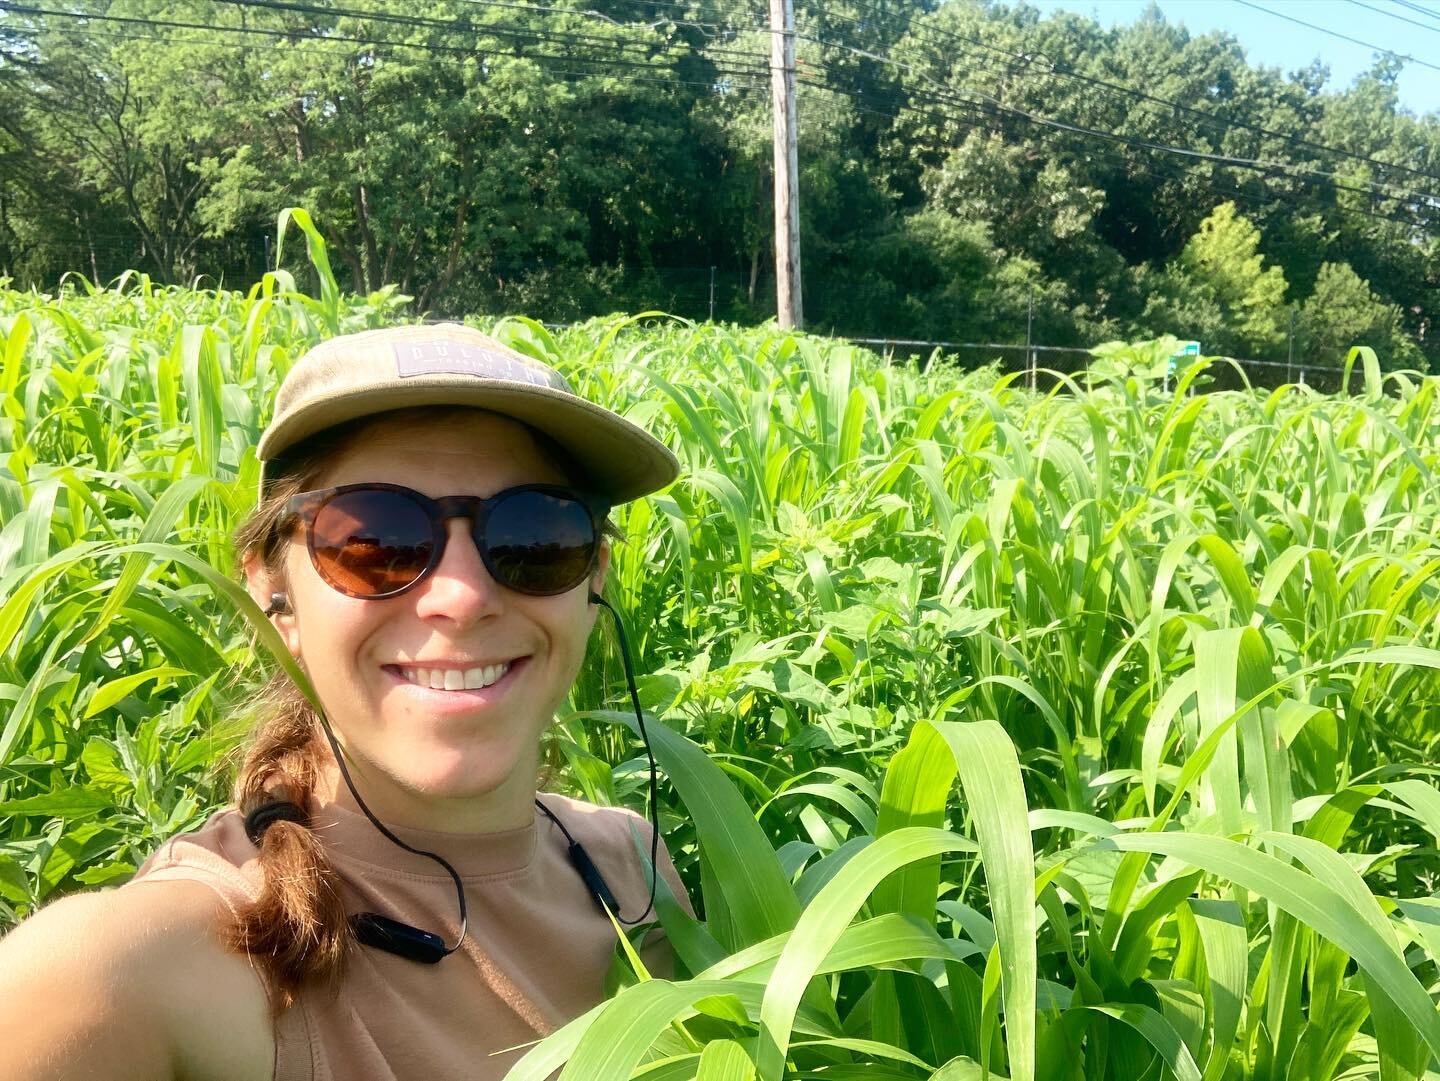 We grow cover crops for the soil. They return nutrients, add organic matter, protect from erosion and soil loss, and make the soil more resilient in the face of extreme weather. This sorghum sudan grass is as tall as me which means it&rsquo;s past ti